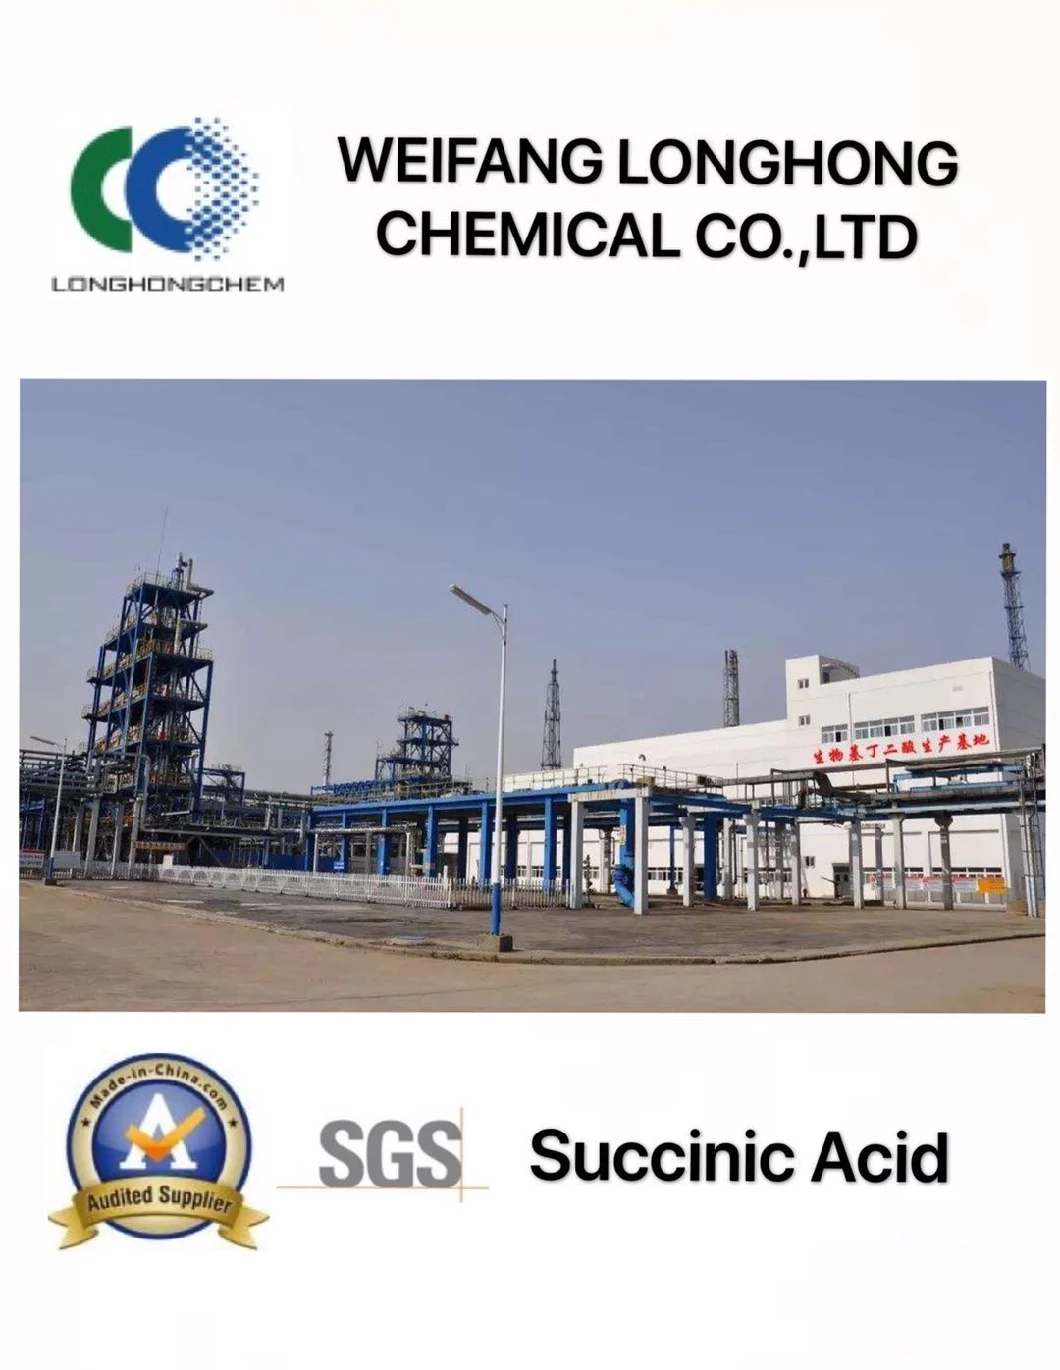 The Important Use of Succinic Acid Is to Prepare Five-Membered Heterocyclic Compounds/Also Used to Prepare Alkyd Resins